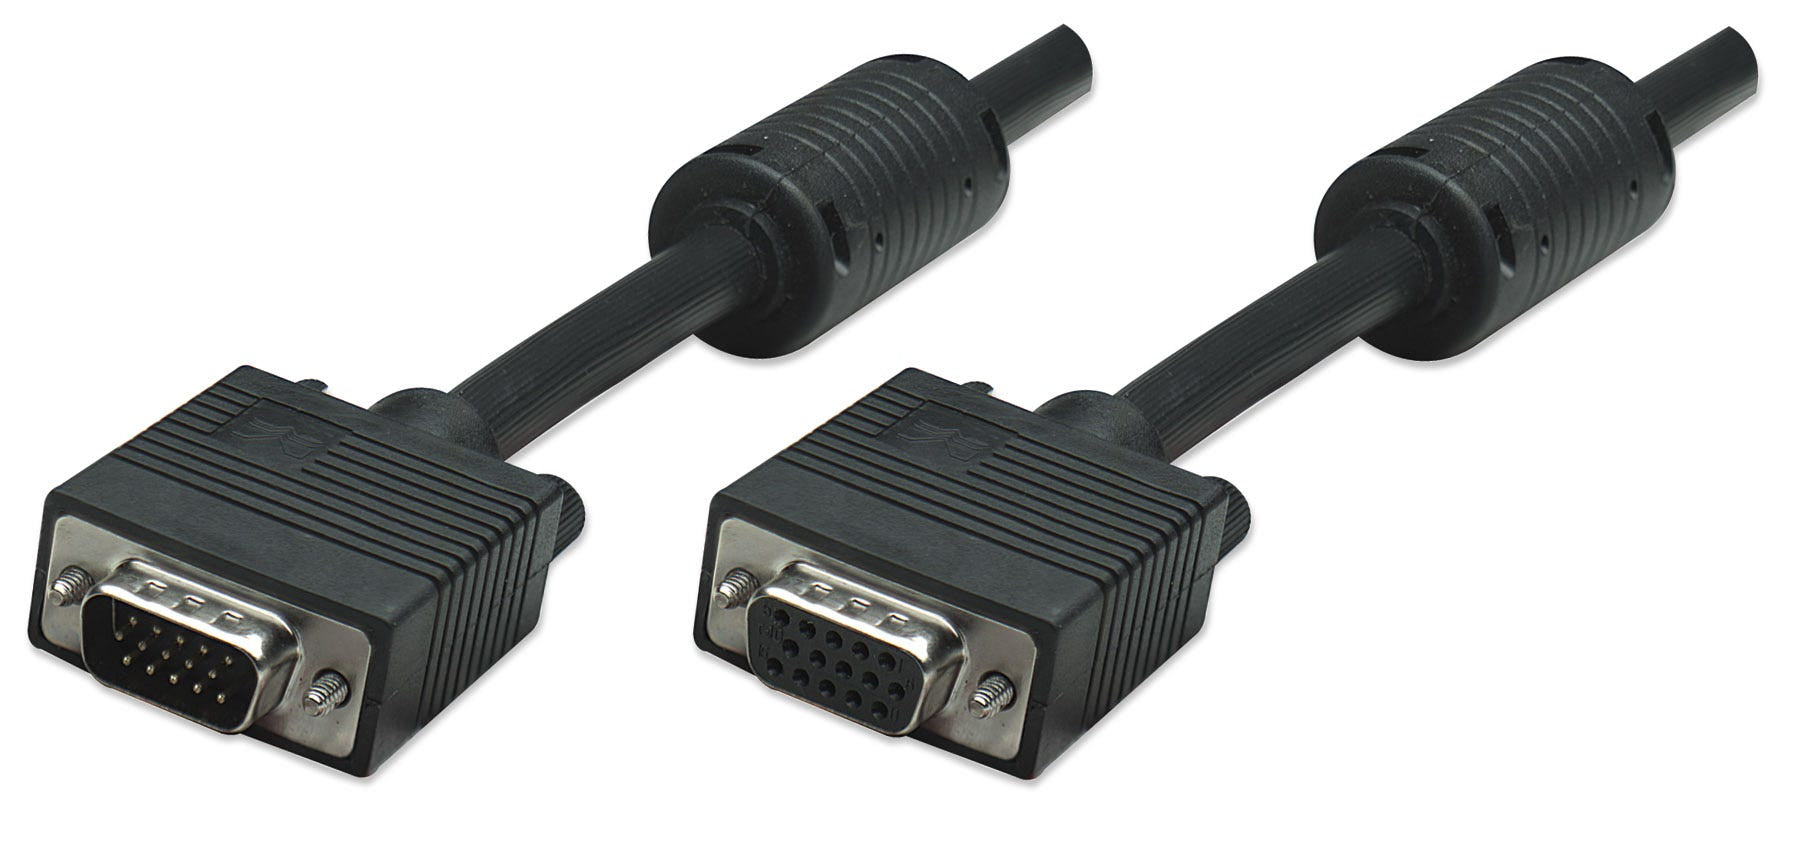 VGA Extension Cable (with Ferrite Cores)